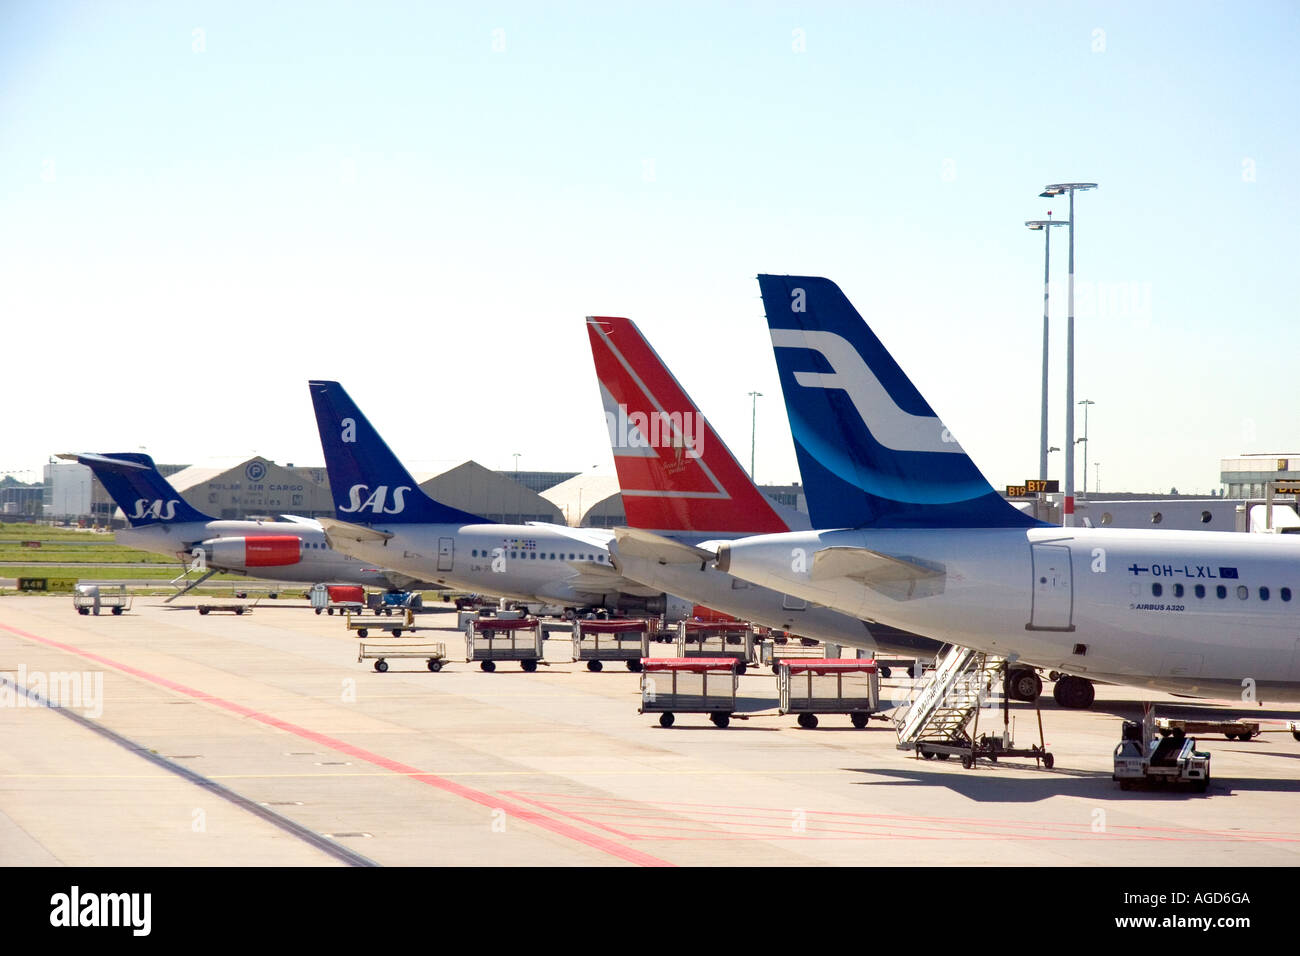 Aircraft parked at Schiphol International airport in Amsterdam, Netherlands. Stock Photo